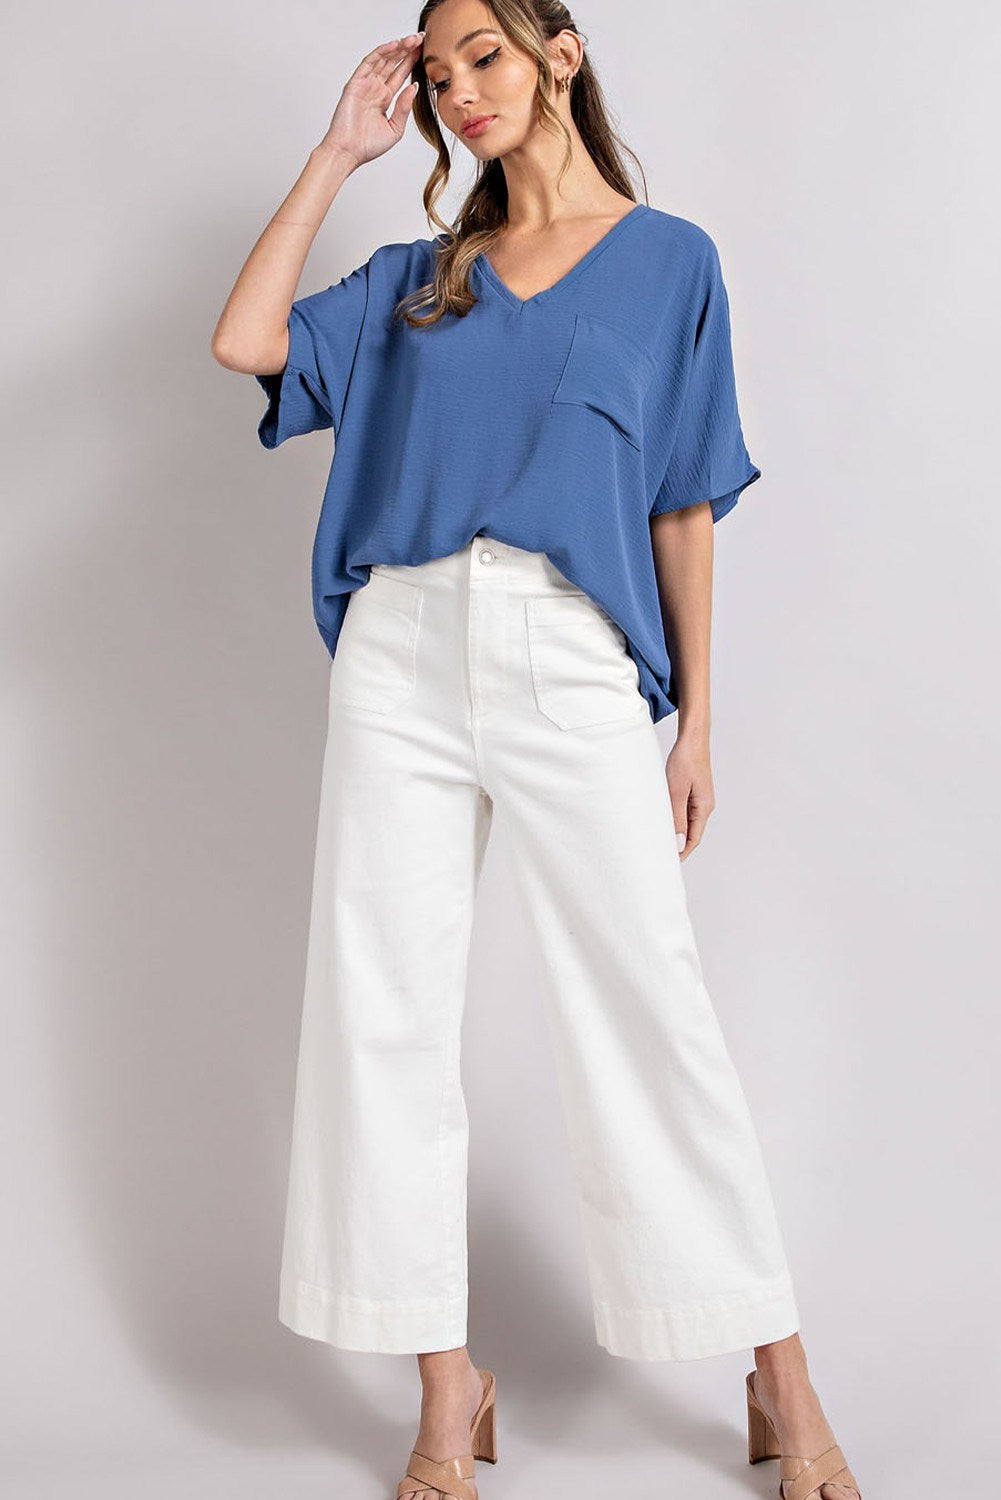 Woven top with V-neckline short sleeves and chest pocket